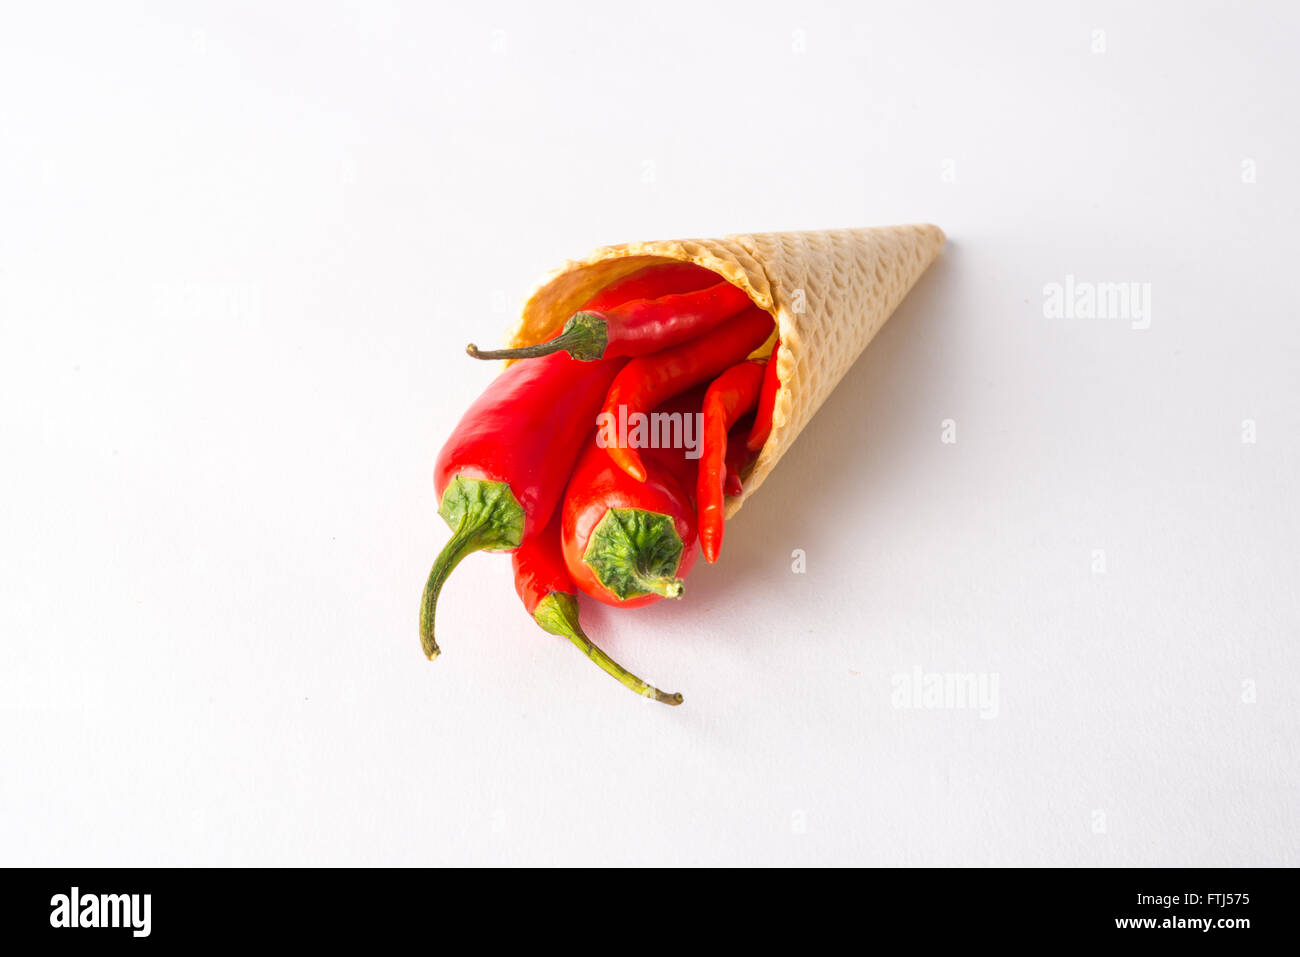 Red hot chili peppers in a wafer cone, unusual food Stock Photo